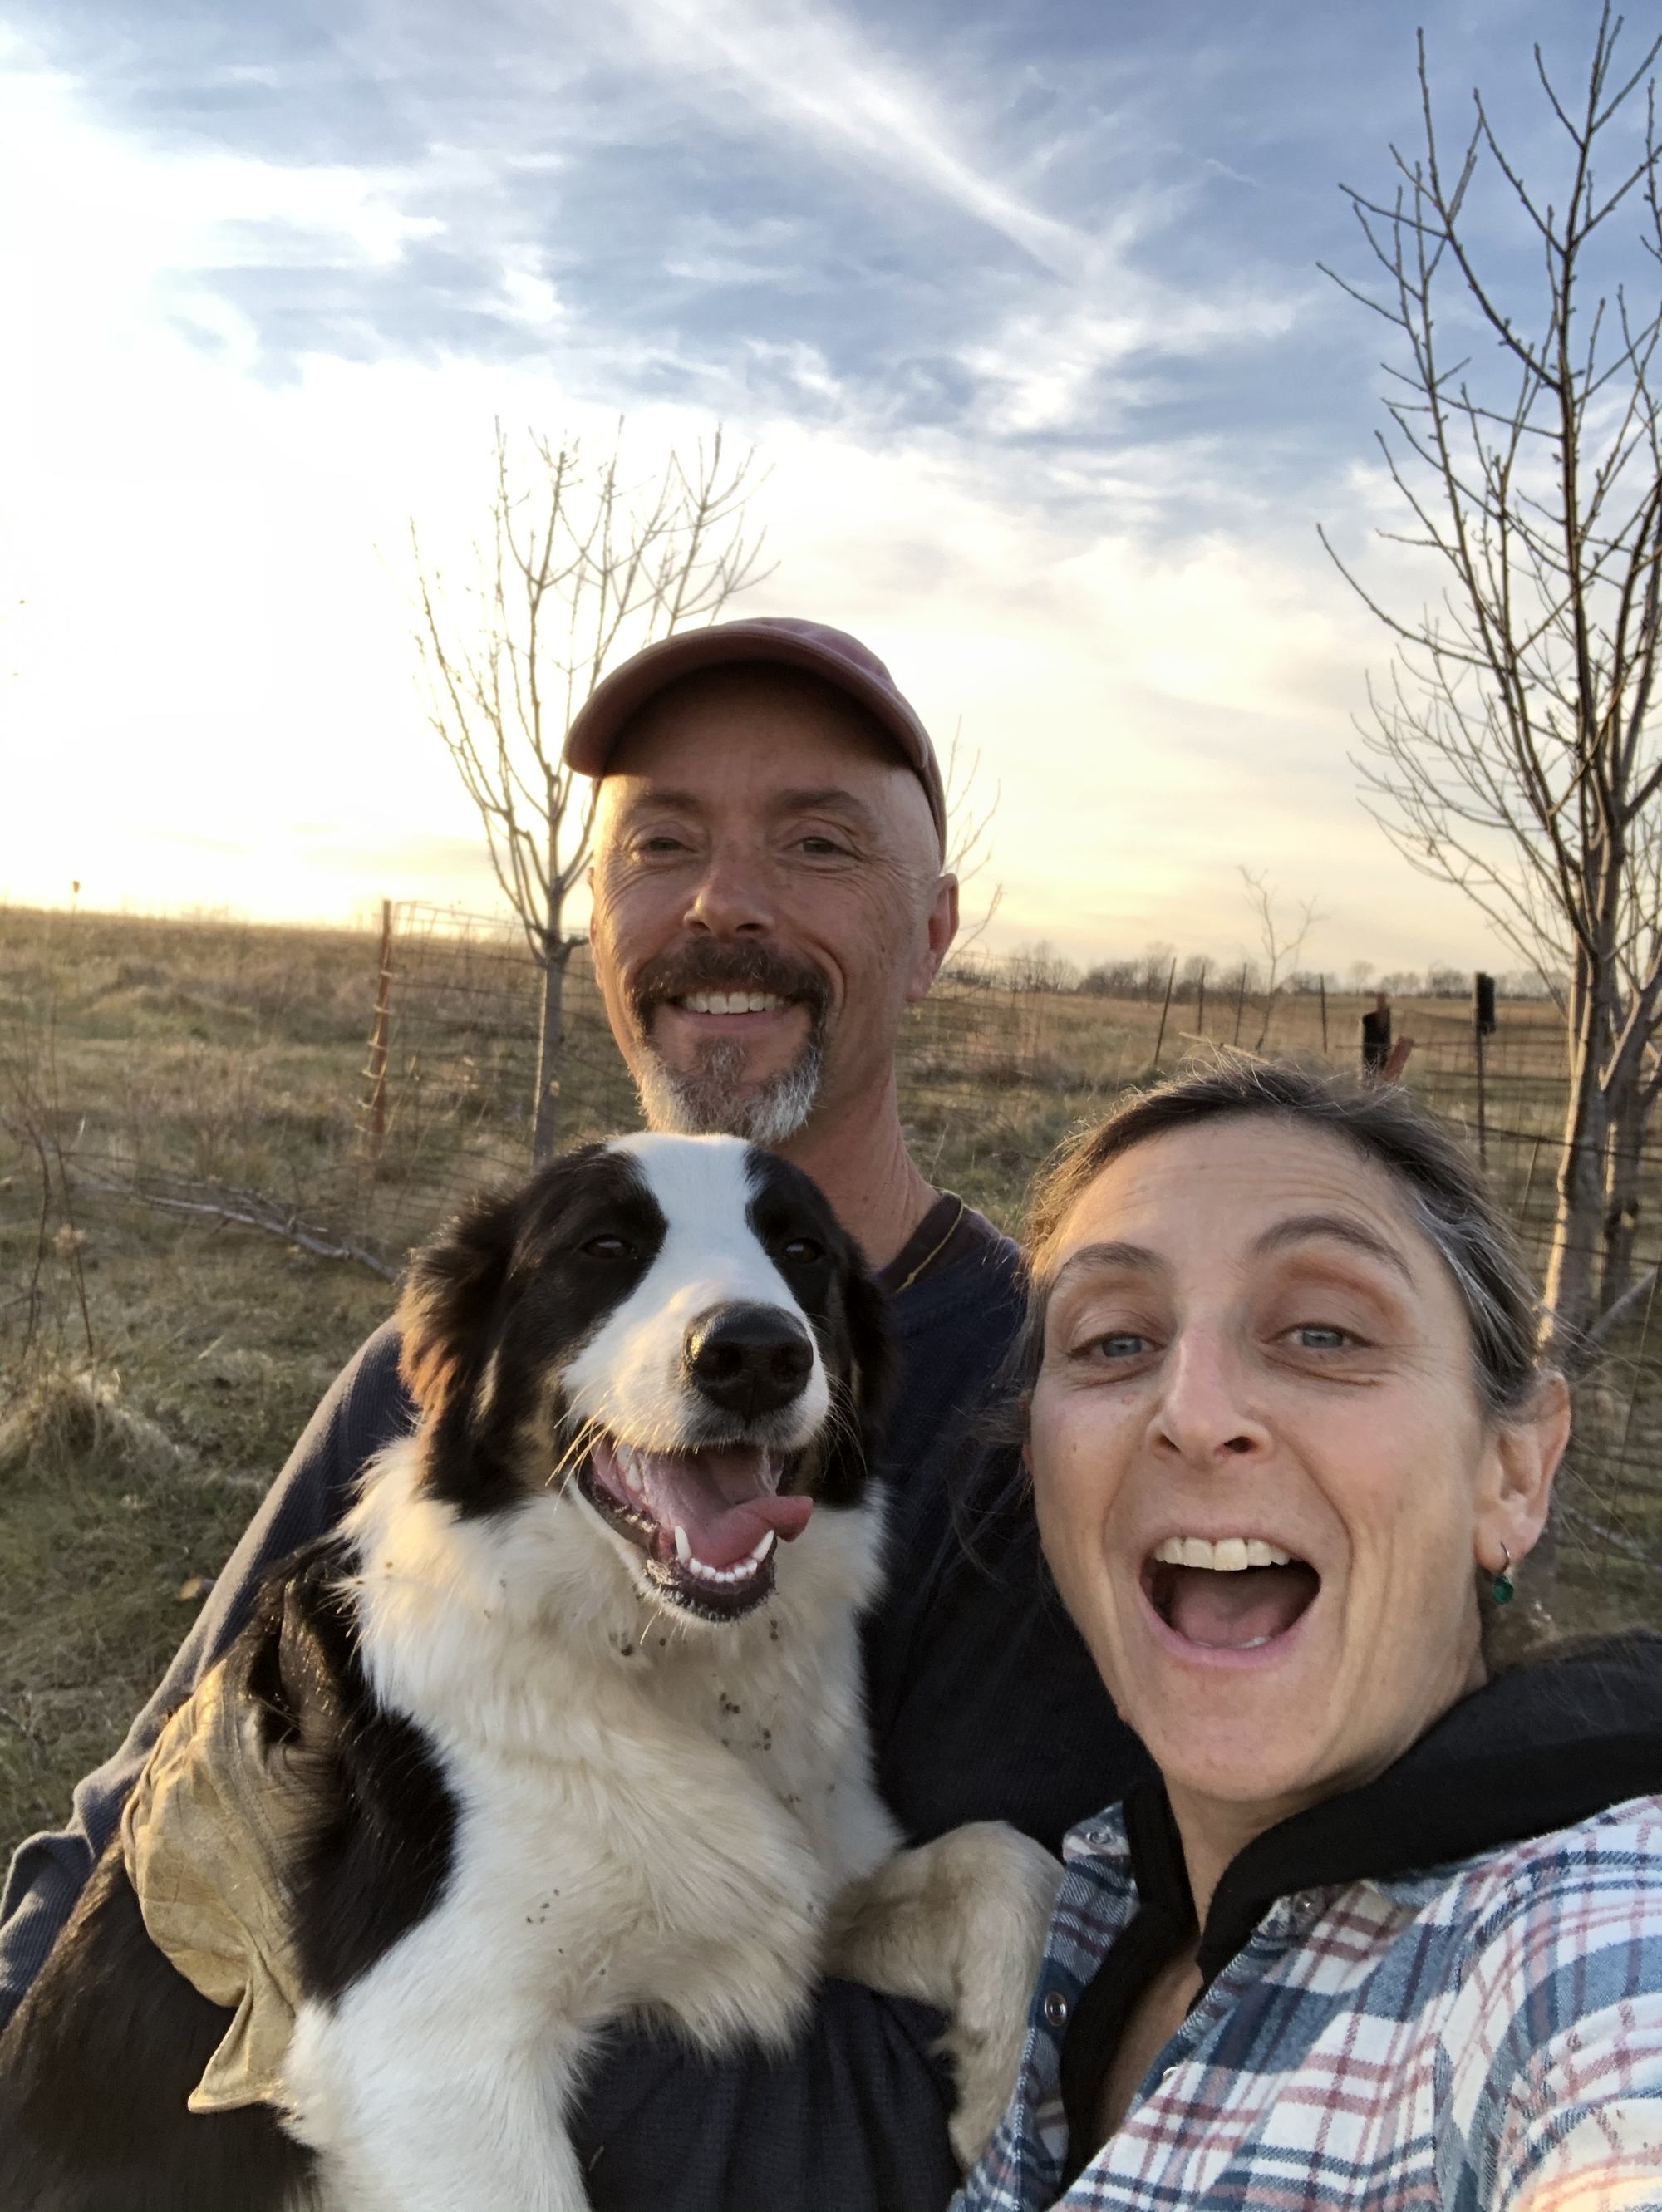 Beth Hoffman takes a selfie with her dog and partner in field. November 2021